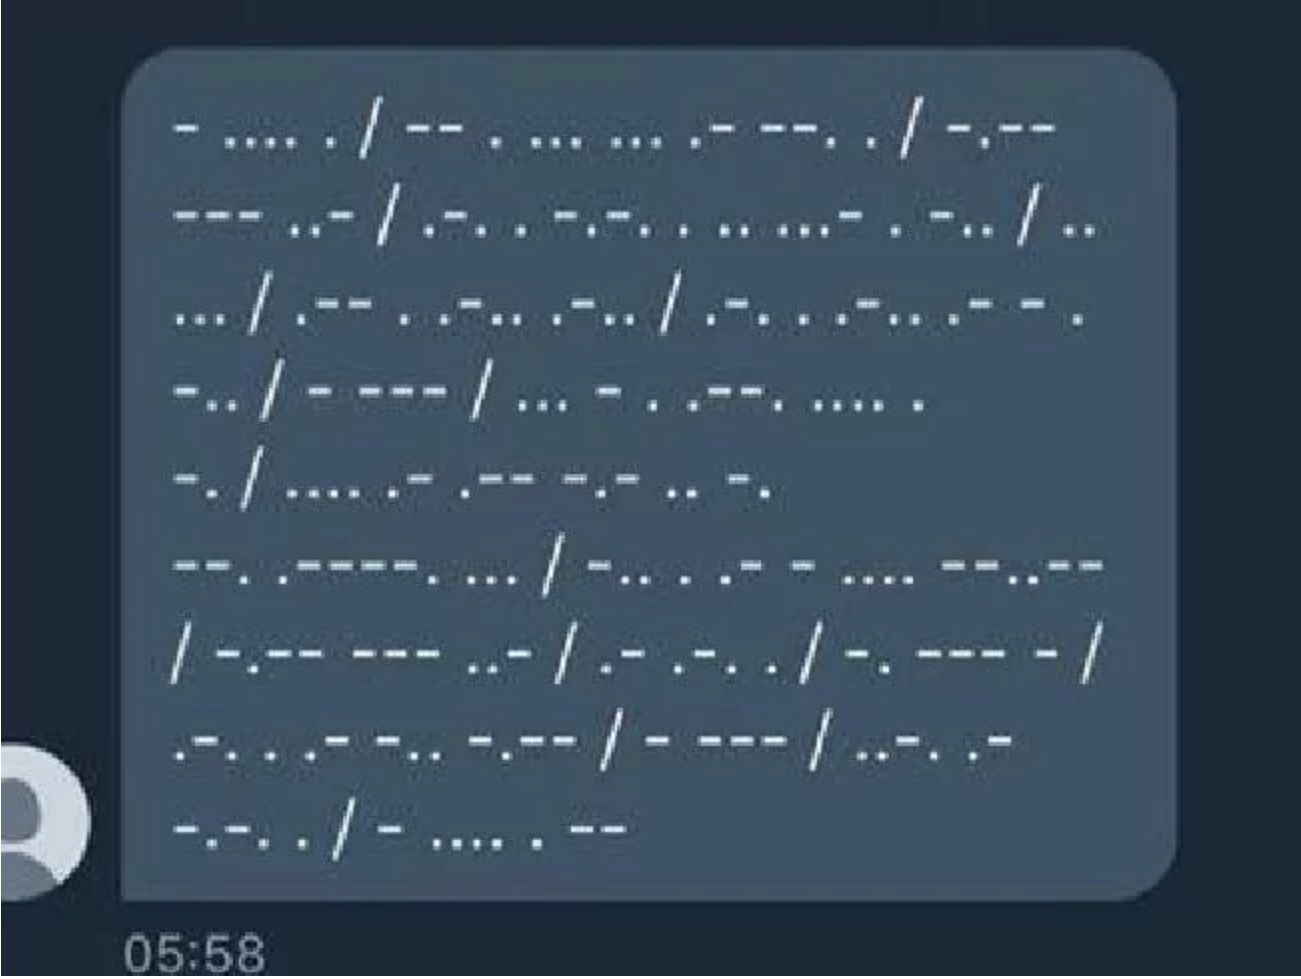 Twitter users received this mysterious message in Morse code which relates to the late scientist Stephen Hawking. 